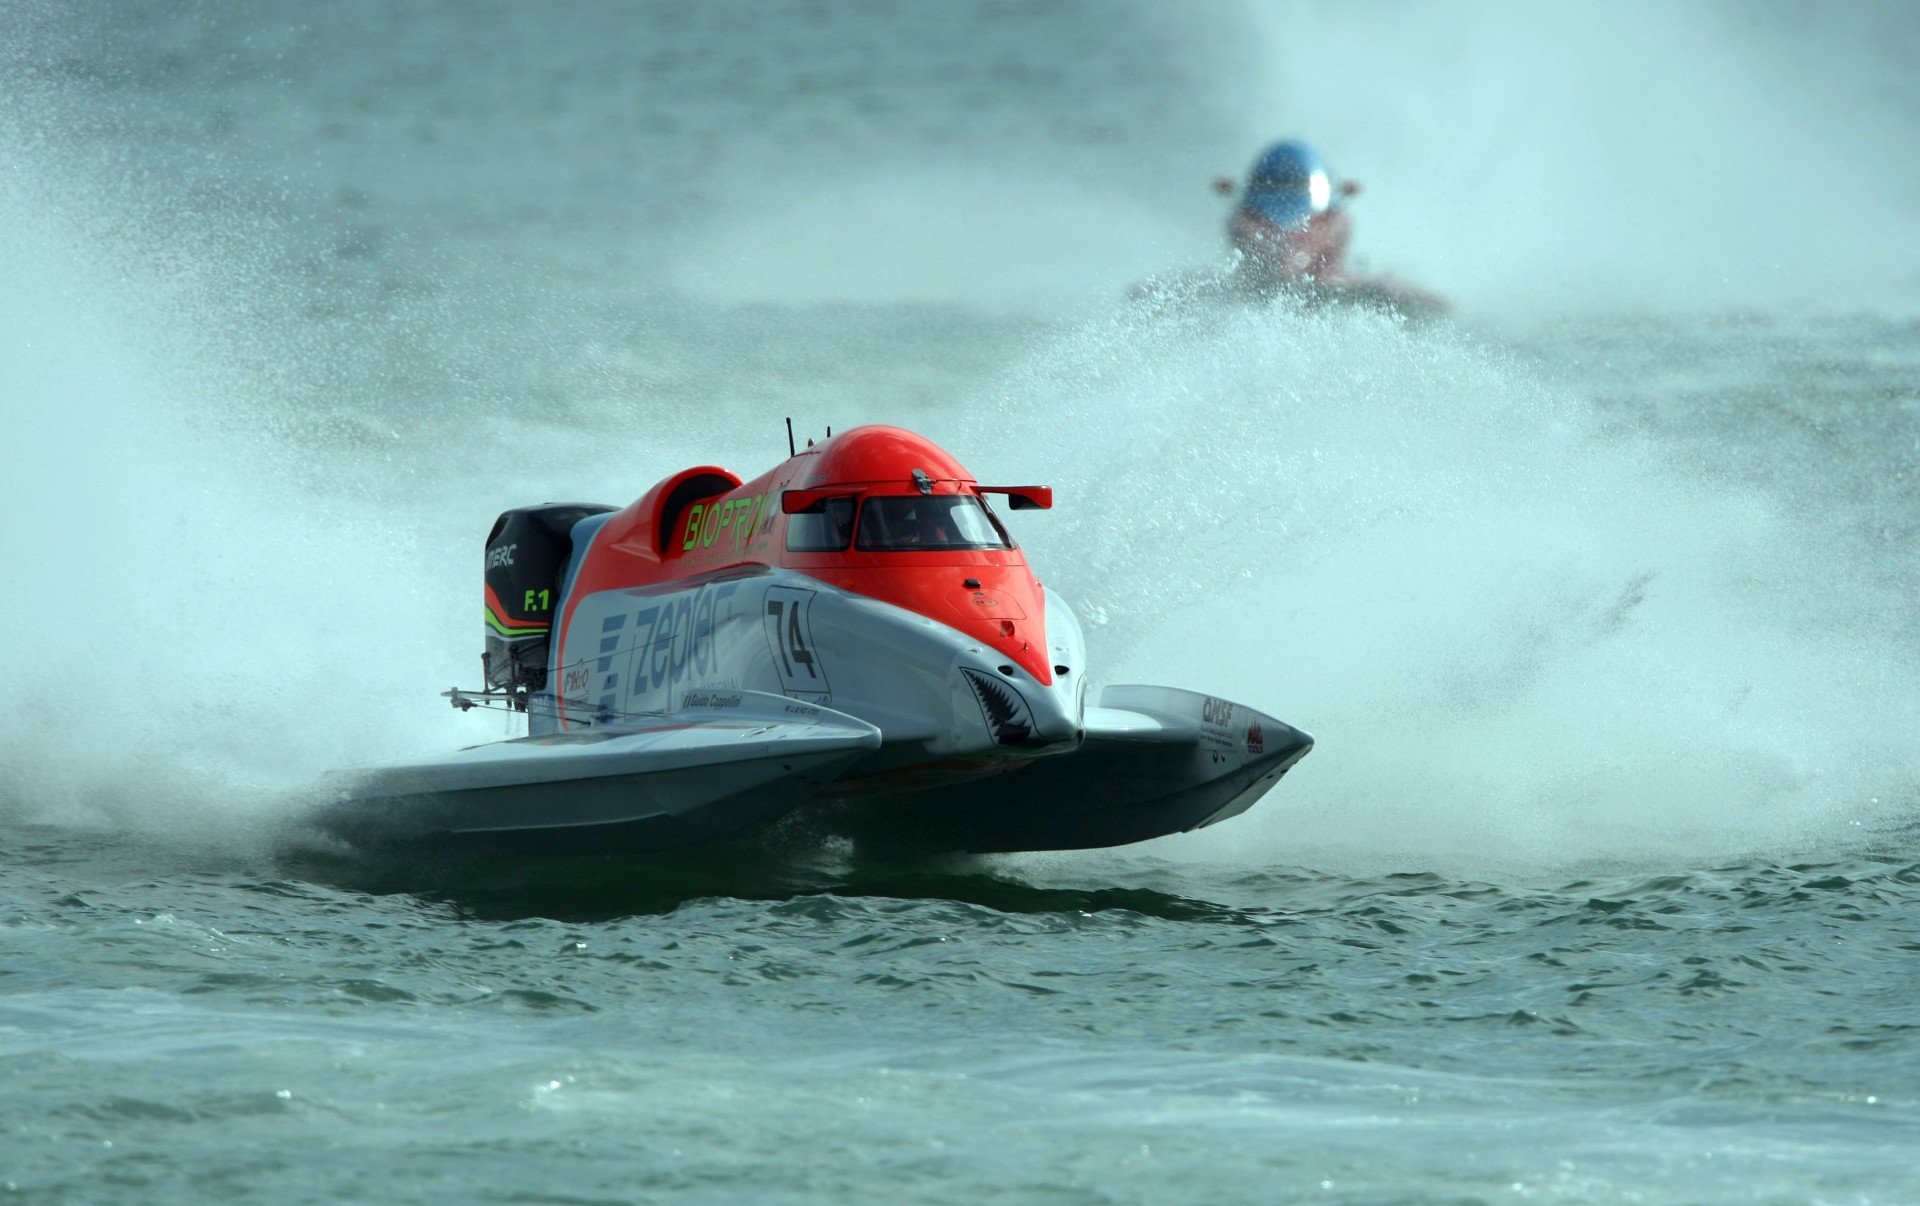 GP OF QATAR-281109-Guido Cappellini of Italy of the Zepter team in action for the UIM F1 Powerboat Grand Prix of Qatar, on the Doha Corniche, Doha, Qatar, the race days are November 27-28, 2009. Picture by Paul Lakatos/Idea Marketing.